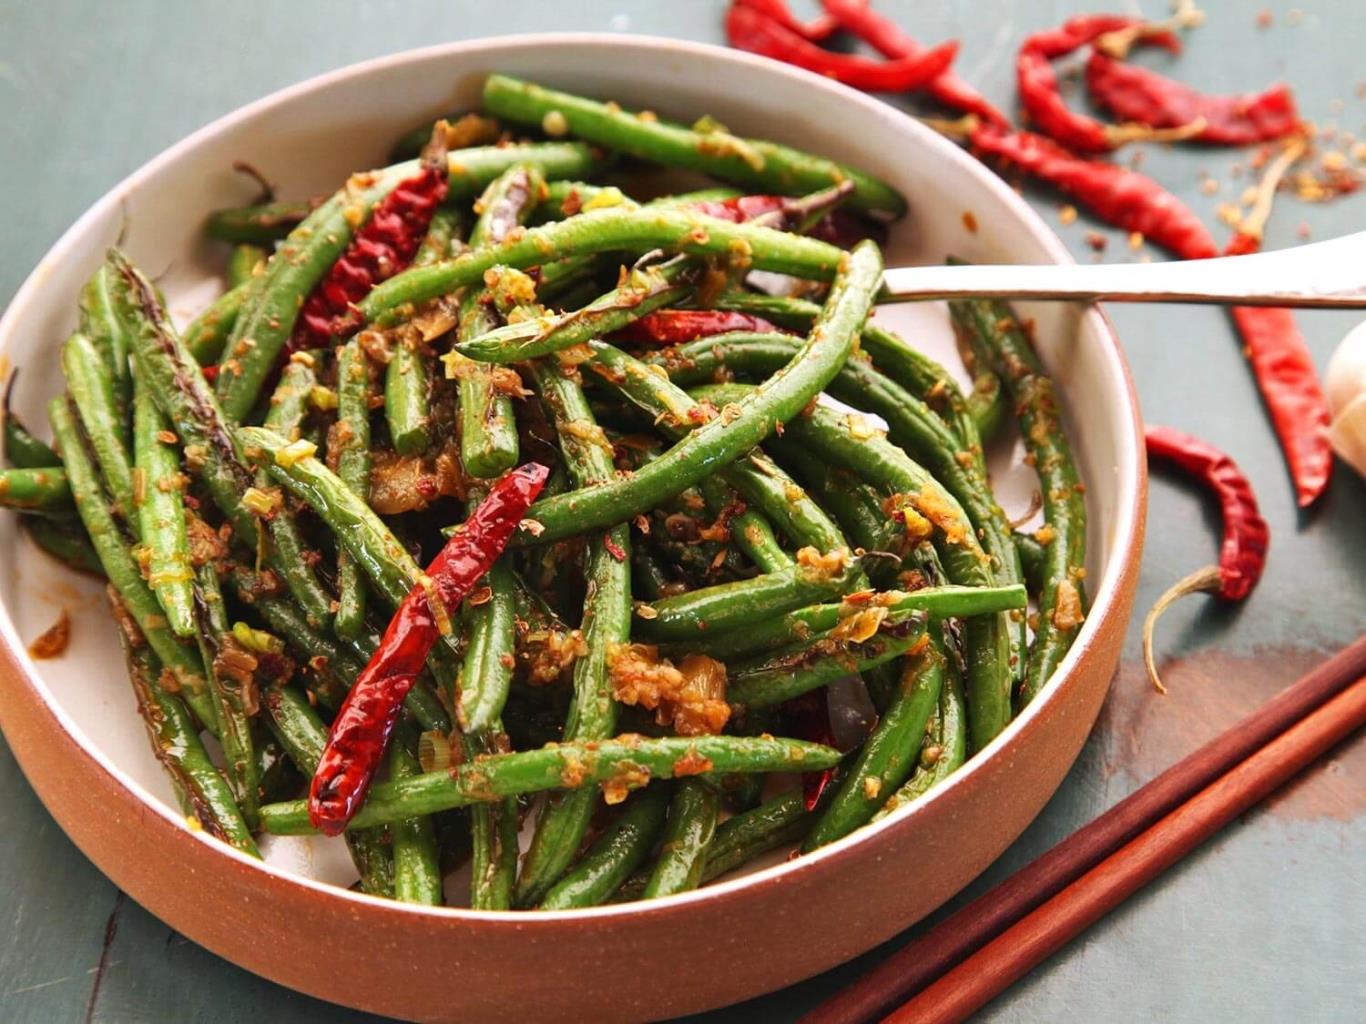 Explore Sichuan dishes, the most popular cuisine in China